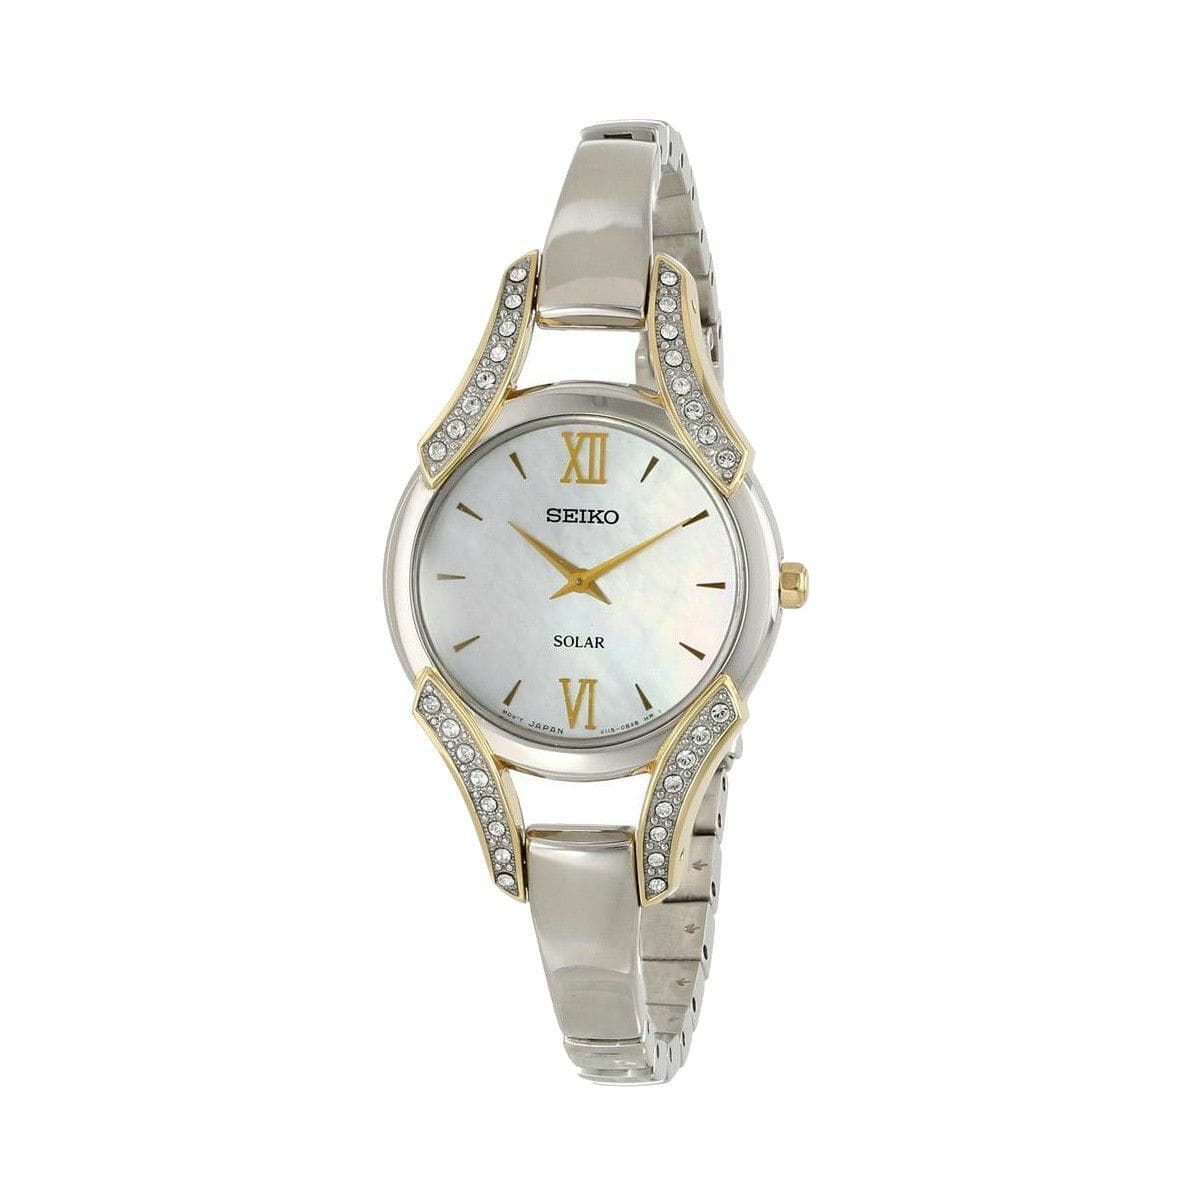 Seiko SUP214 Solar Stainless Steel Swarovski Crystal Bezel Mother of Pearl Dial Watch 029665169815